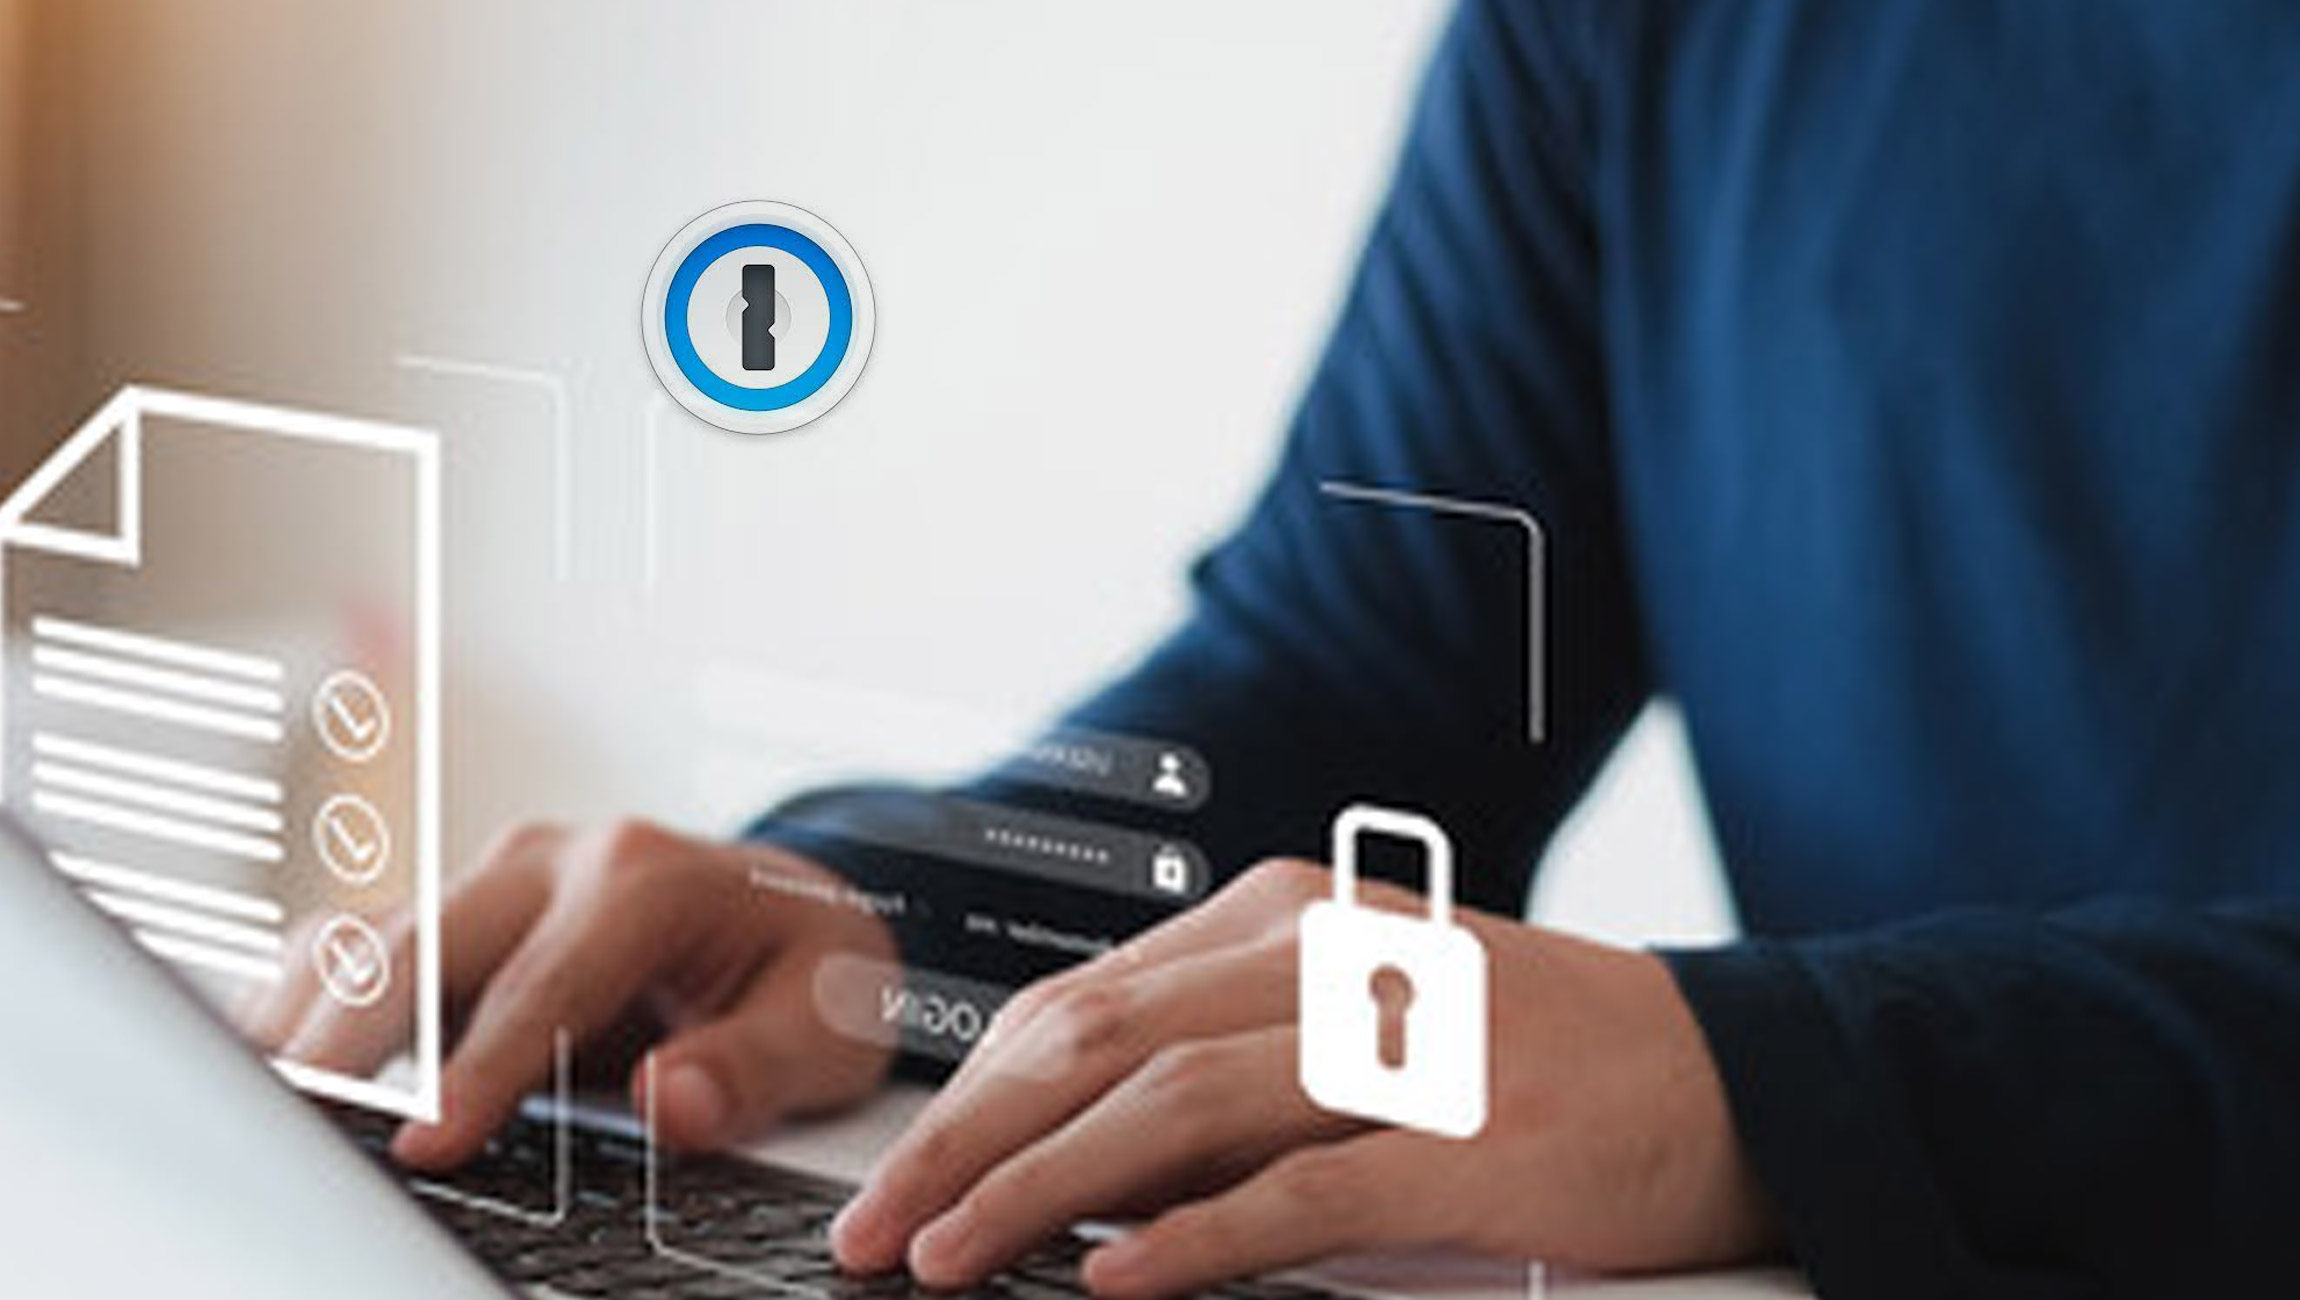 1Password closes $620M at $6.8B valuation to bring human-centric Security to All